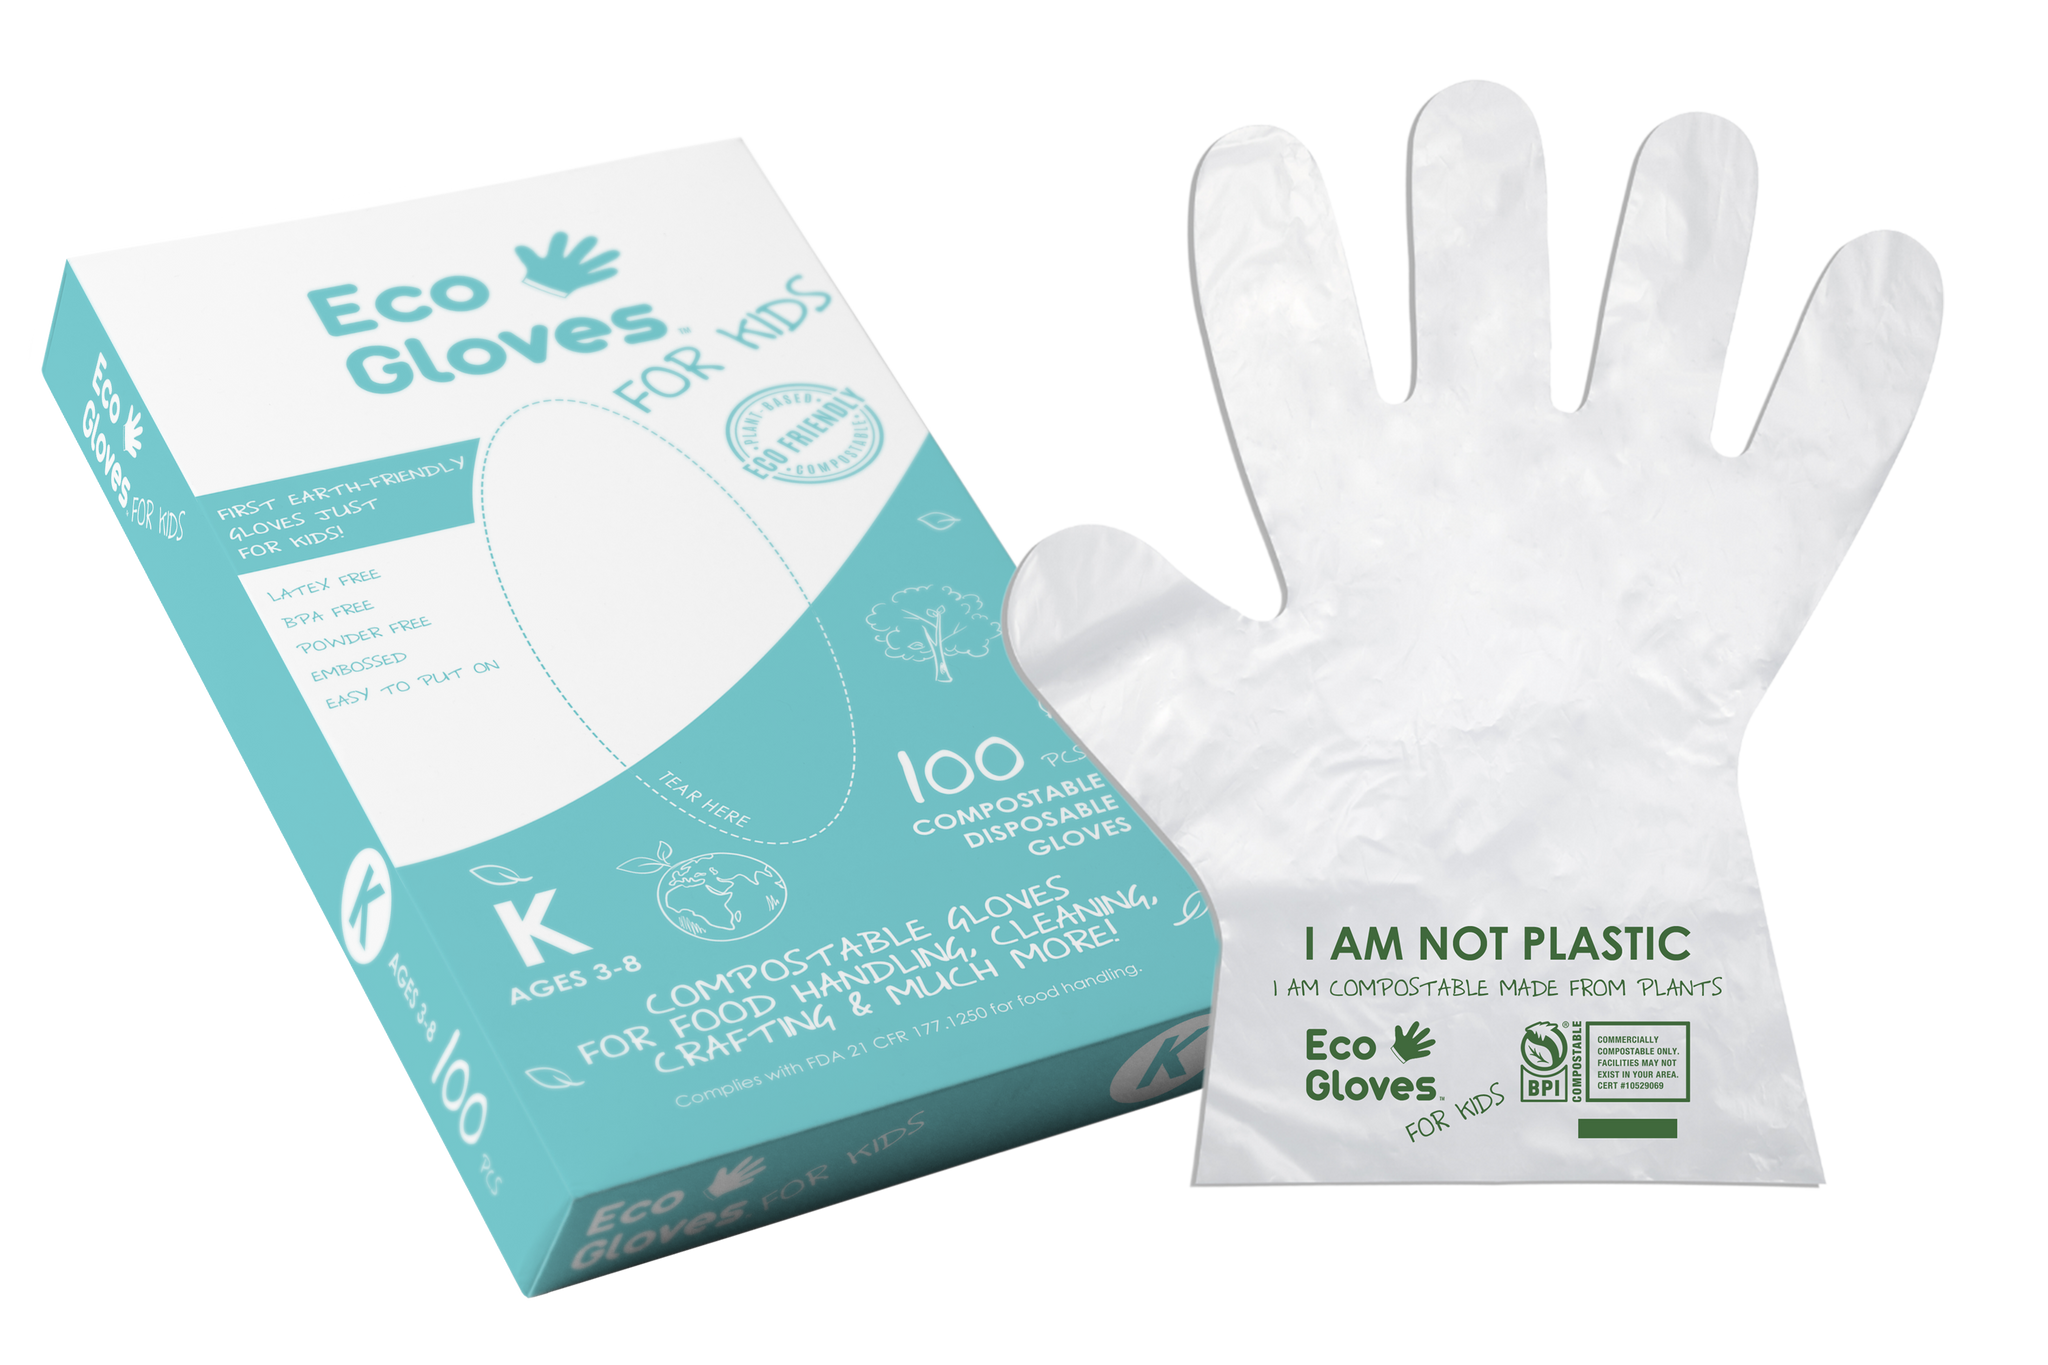 The Spontex Disposable Gloves Free Recycling Scheme